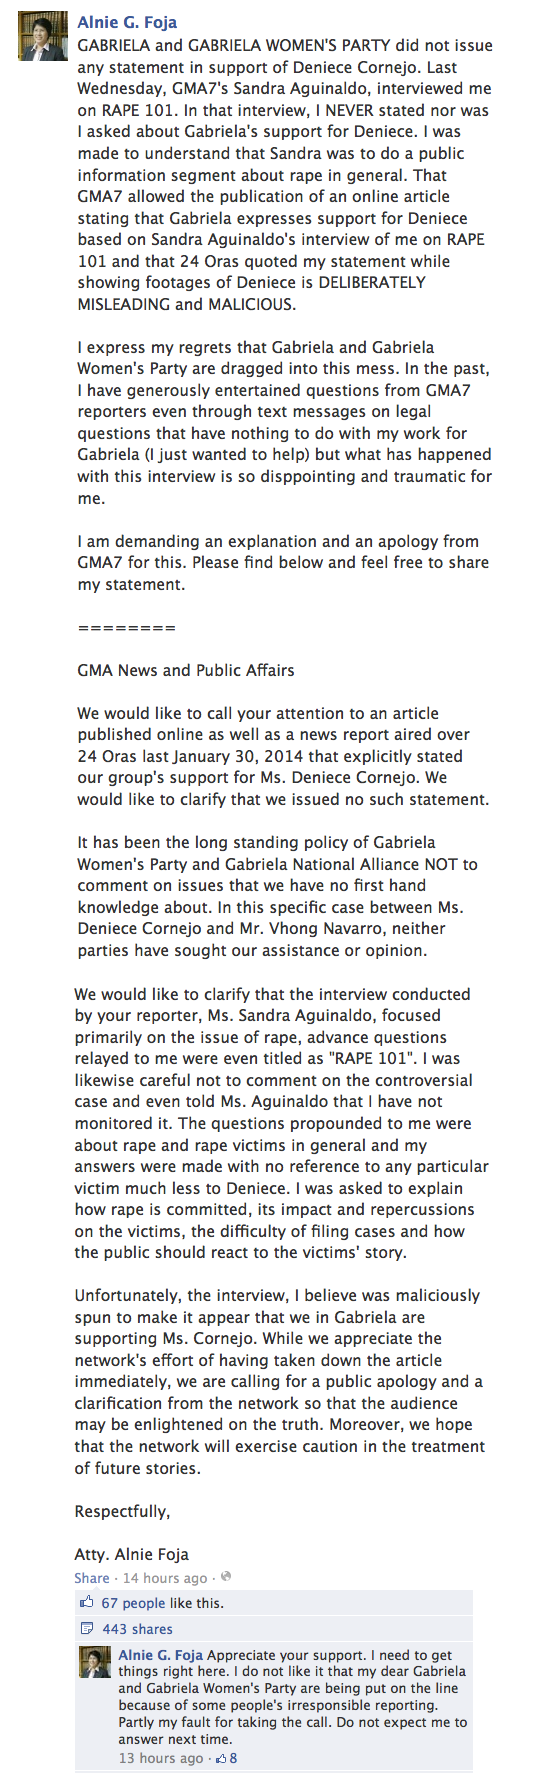 Atty. Alnie Foja's open letter against GMA News malicious and misleading report